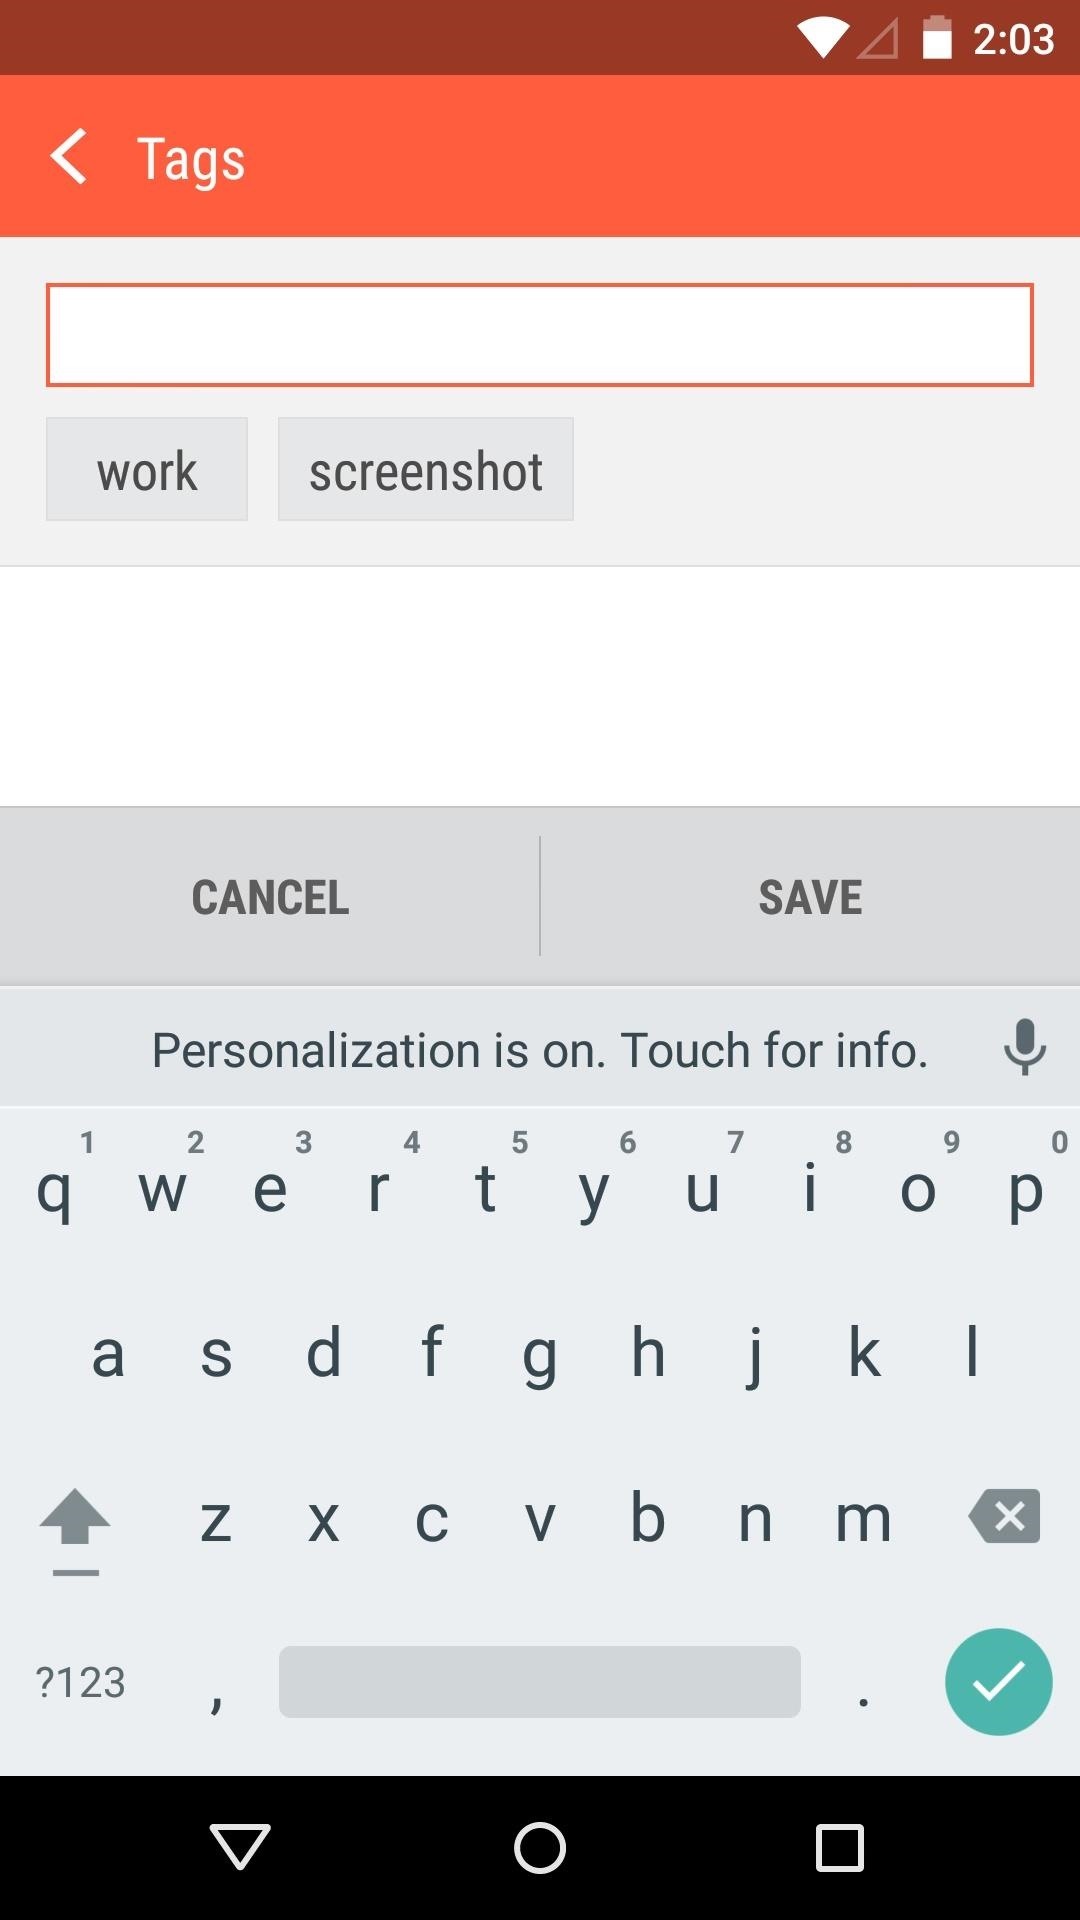 HTC's Gallery App Updated with New Tagging & Editing Modes (APK Inside)